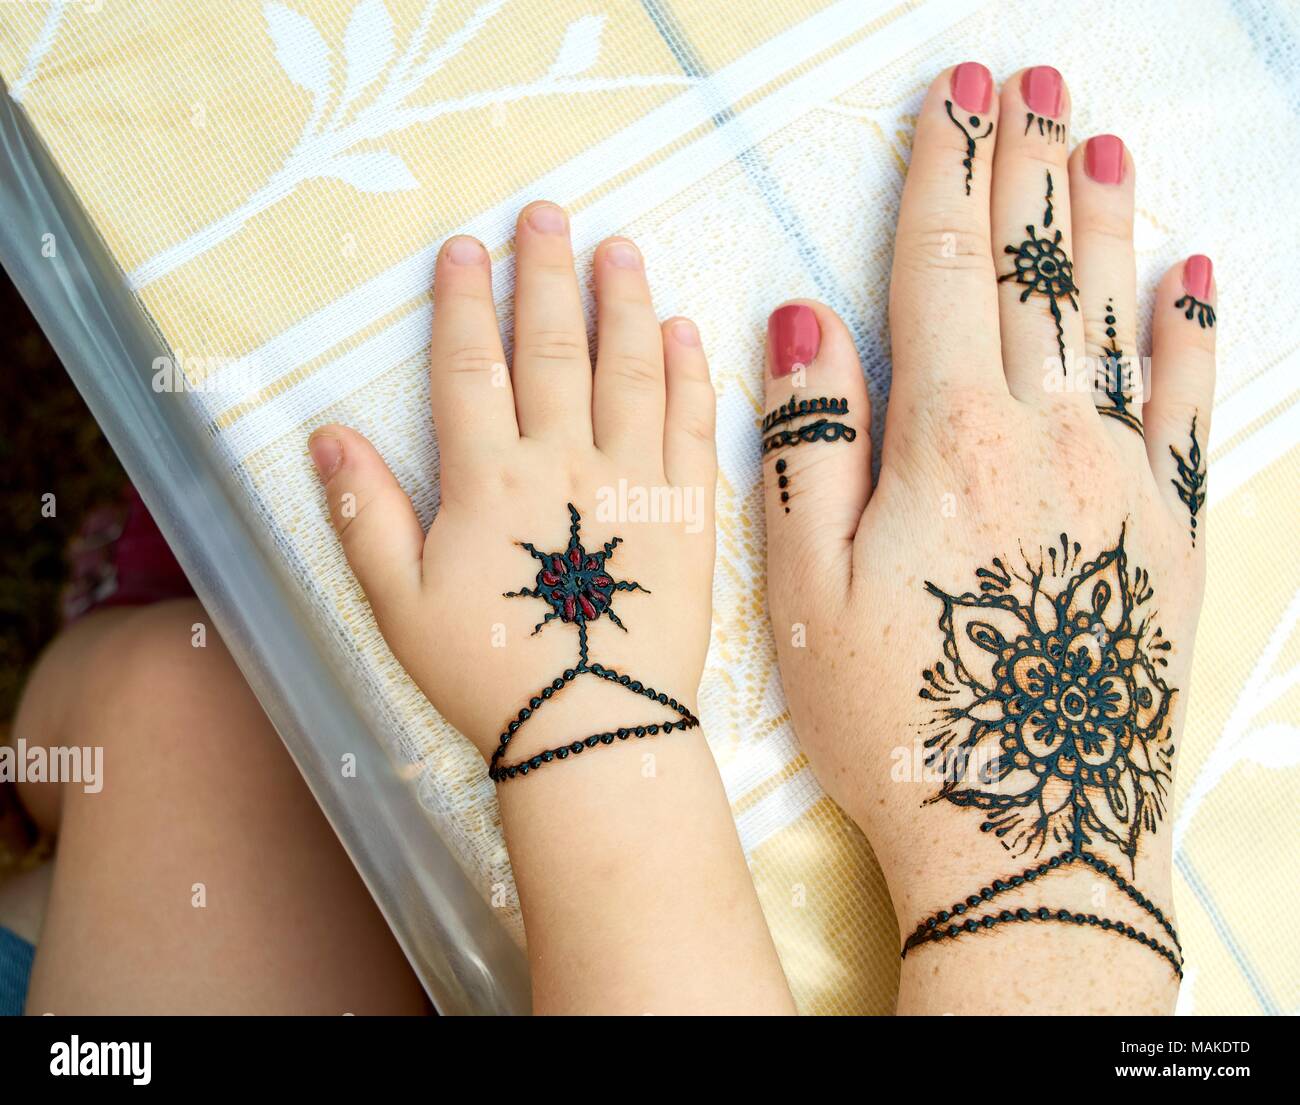 Hands of a mother and child with a traditional indian black flower tattoes on the table outdoors close-up Stock Photo